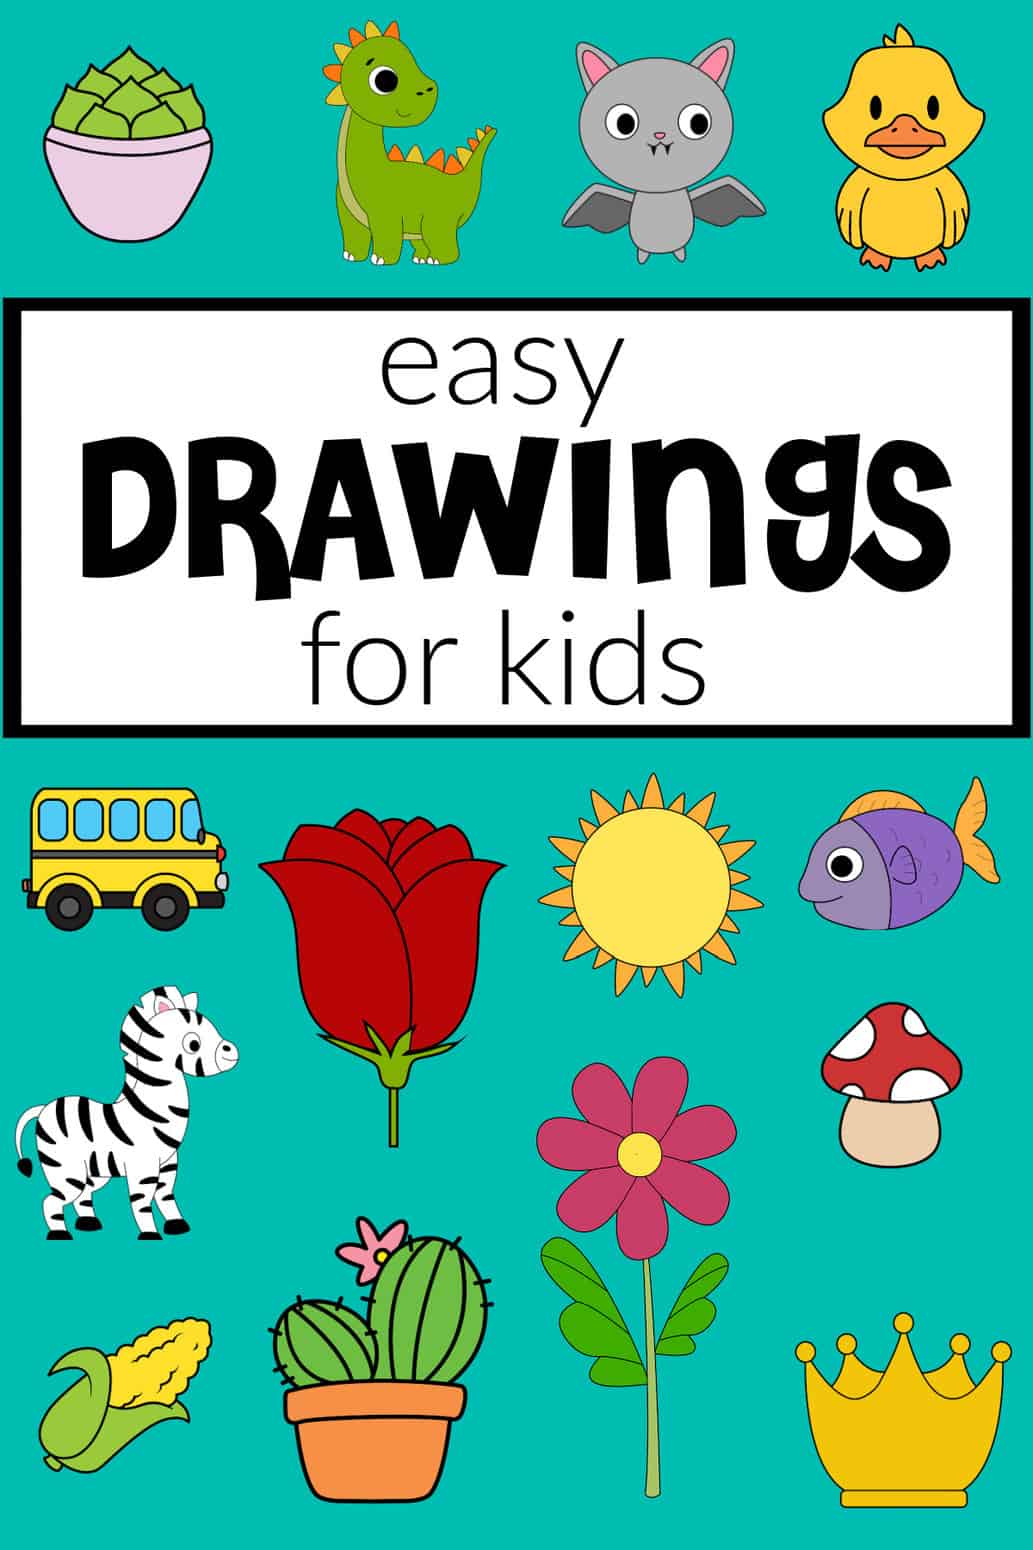 For Kids Archives - Page 22 of 33 - How to Draw Easy-saigonsouth.com.vn